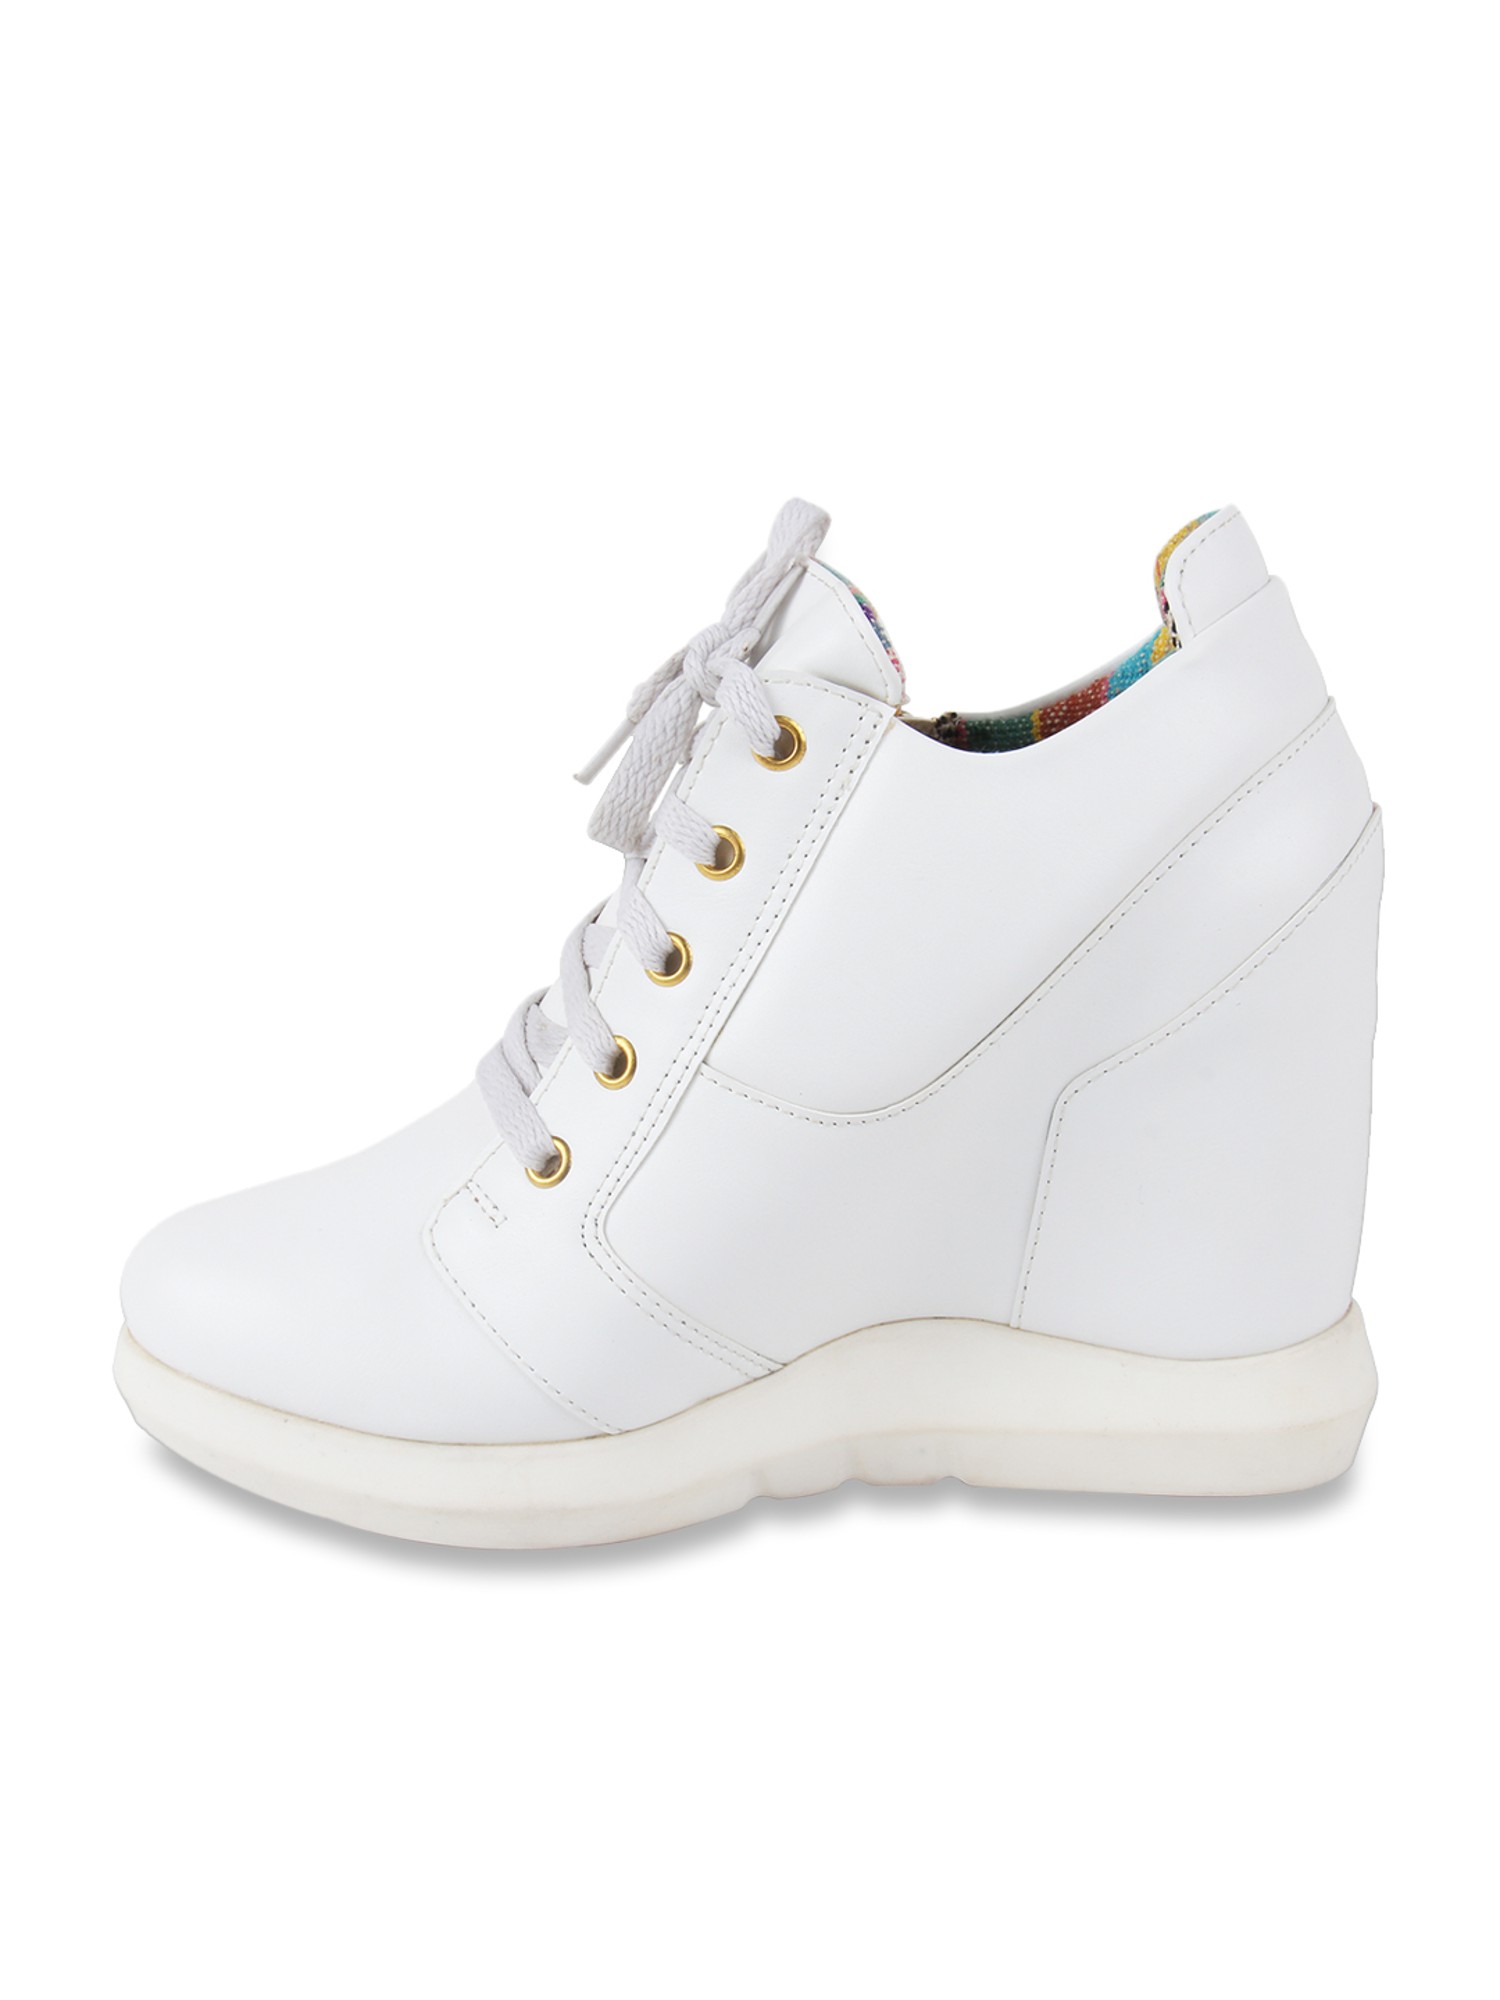 Women's Wedge Sneakers & Athletic Shoes | Nordstrom